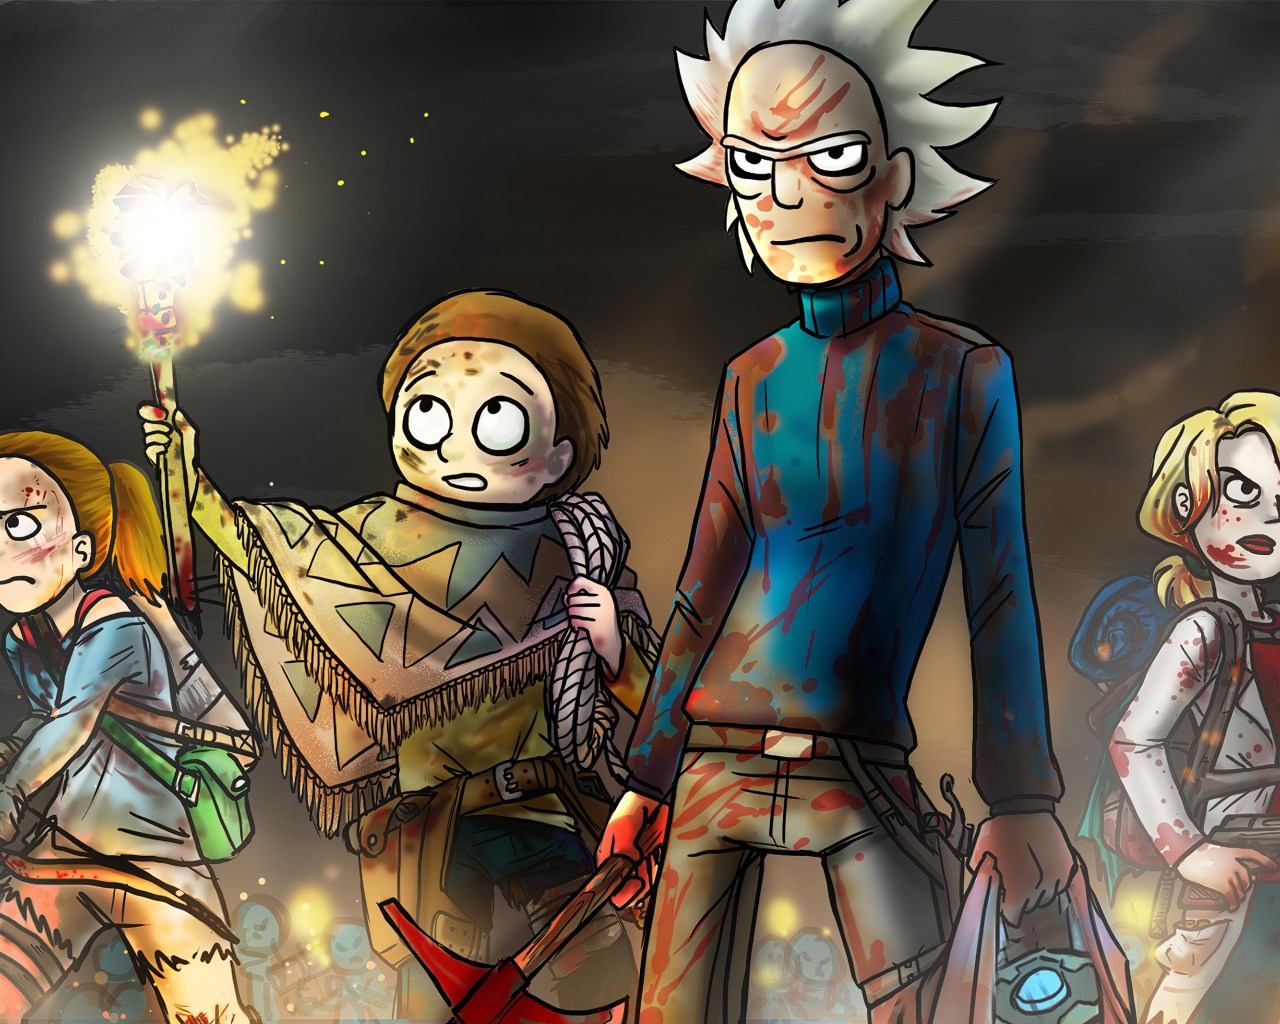 1280x1024 Rick and Morty 2019 Art 1280x1024 Resolution ...